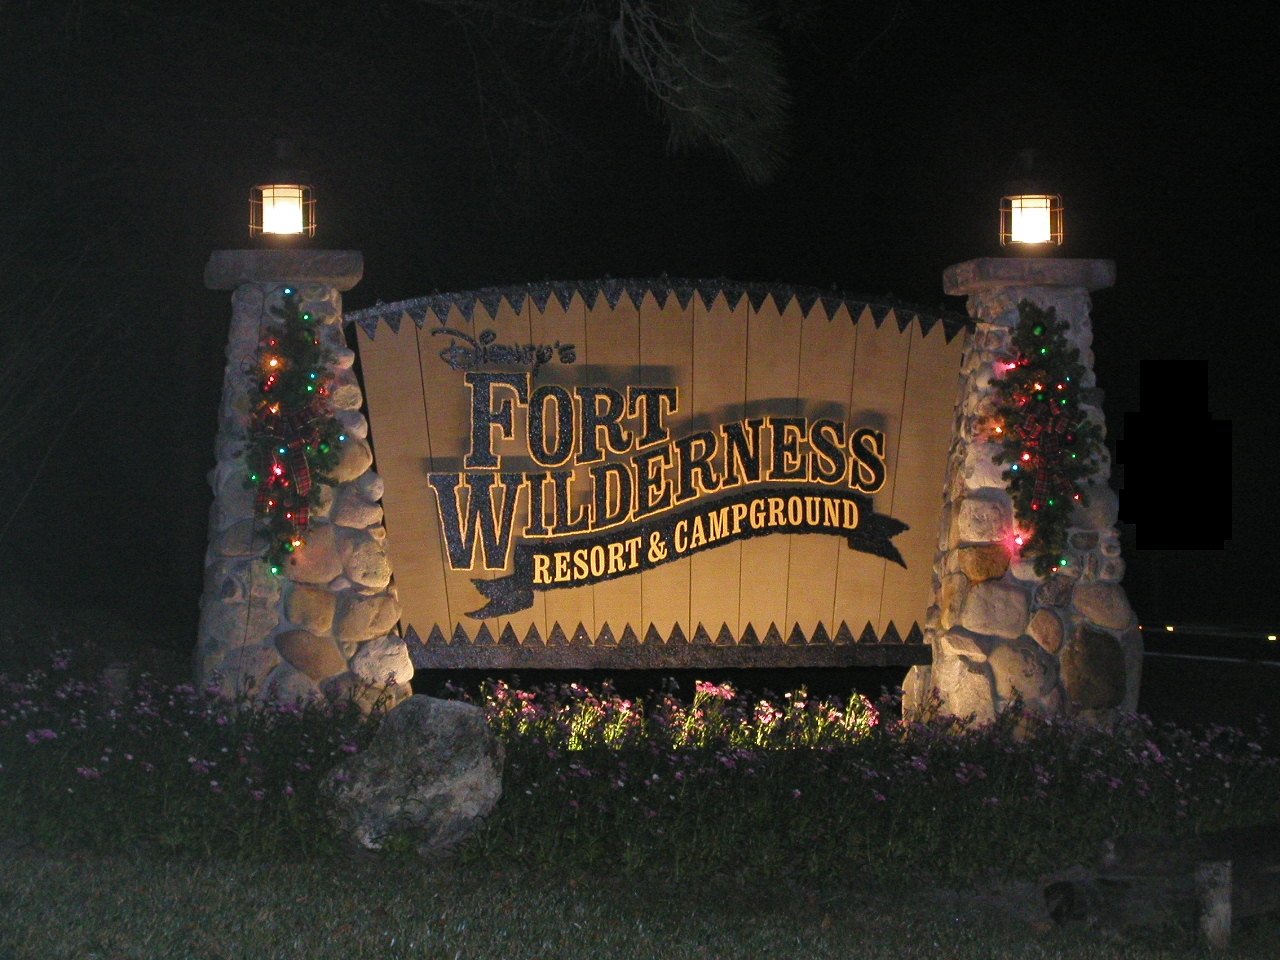 Disney's_Fort_Wilderness_Resort_and_Campground_sign_at_night.jpg